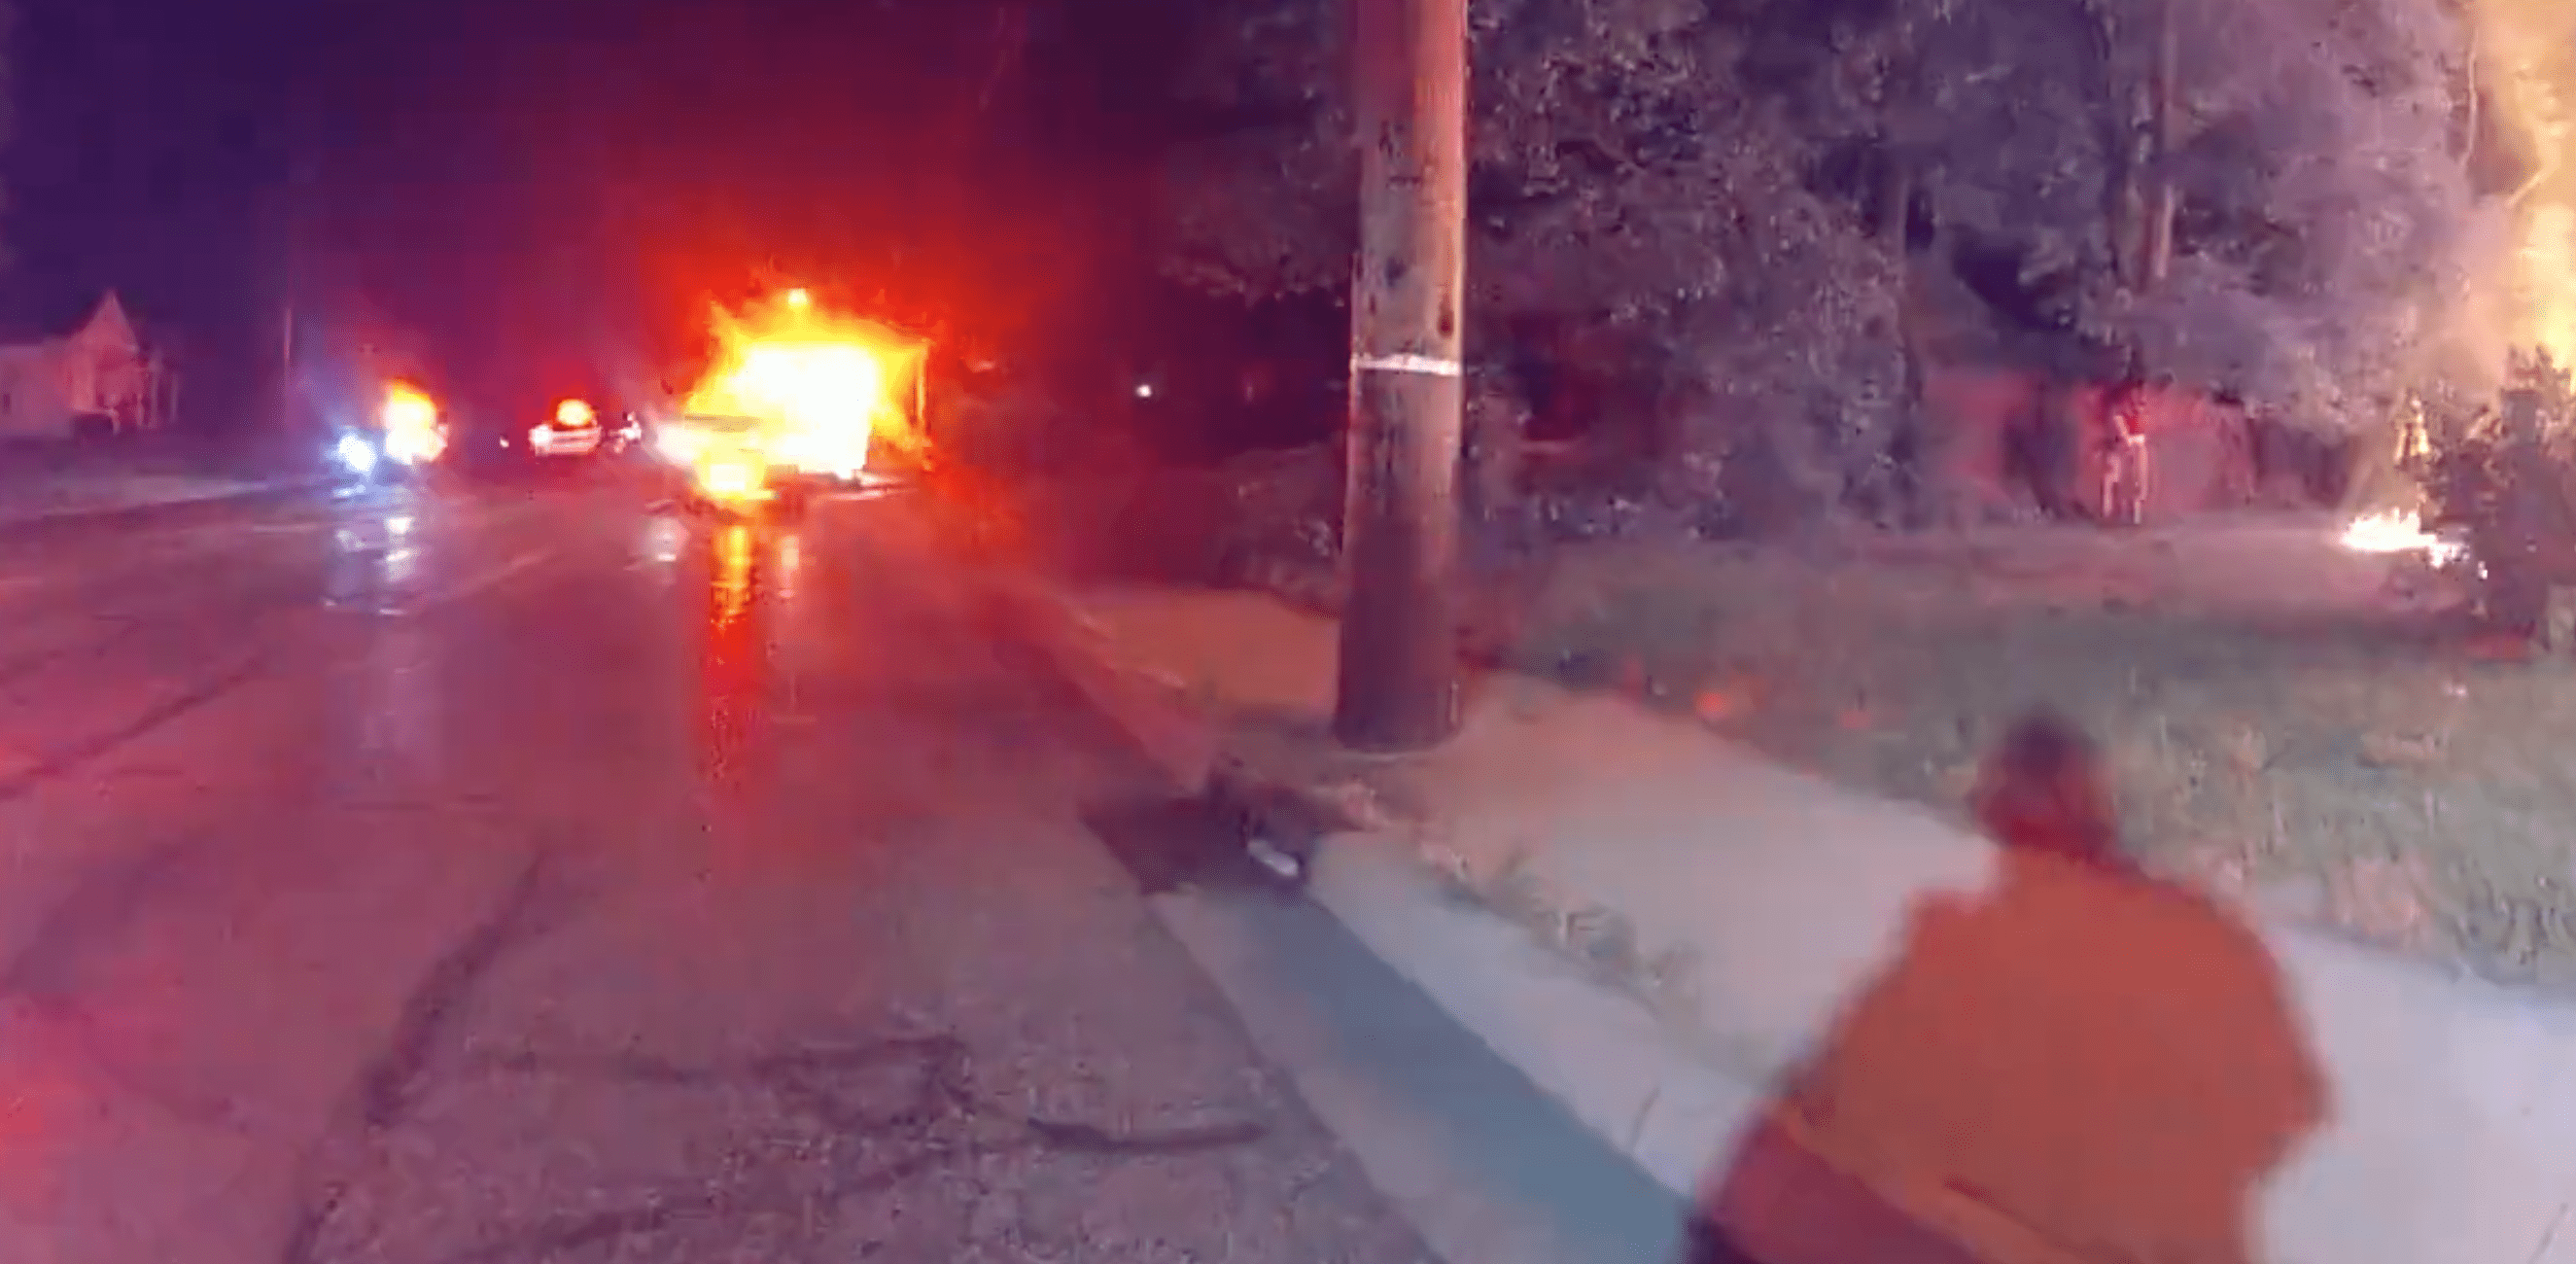 Body cam captures police and emergency services outside a burning house. | Source: Twitter.com/joesampaul